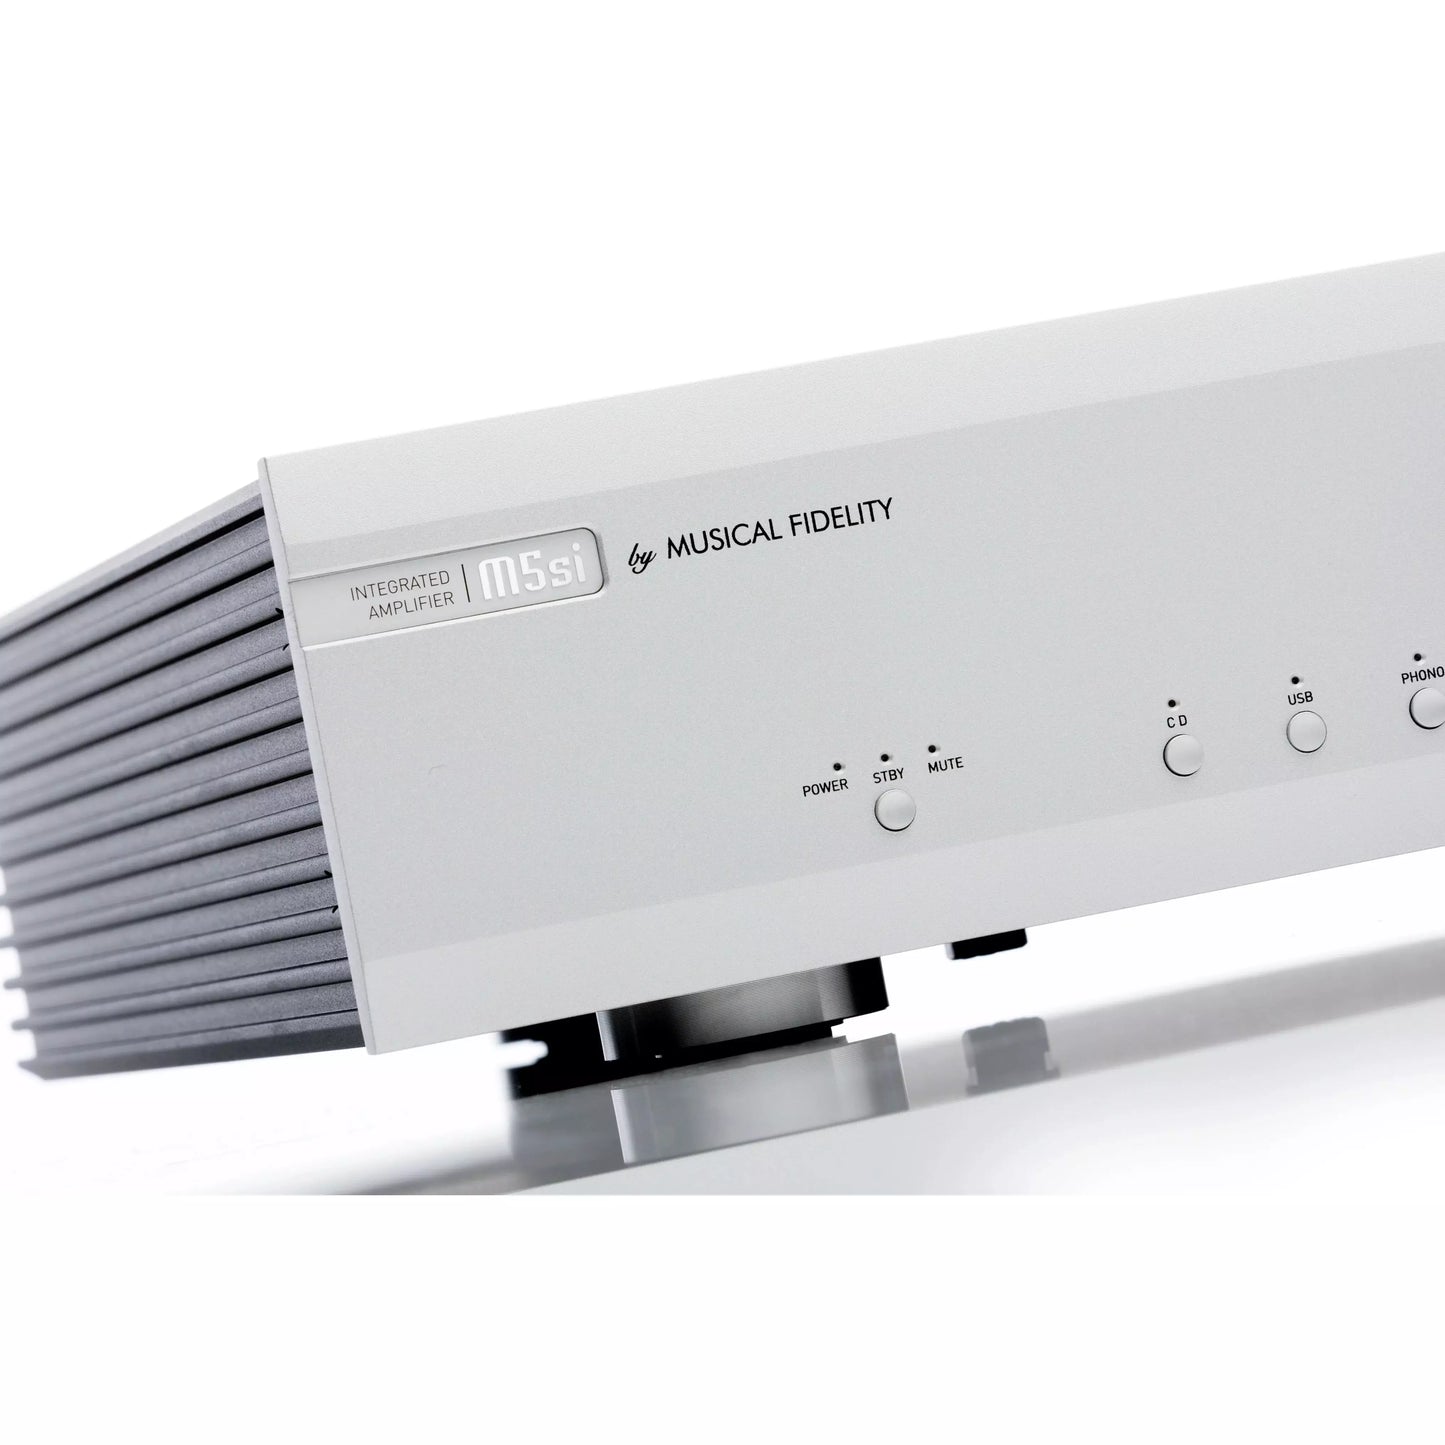 Musical Fidelity - M5si Integrated Amplifier